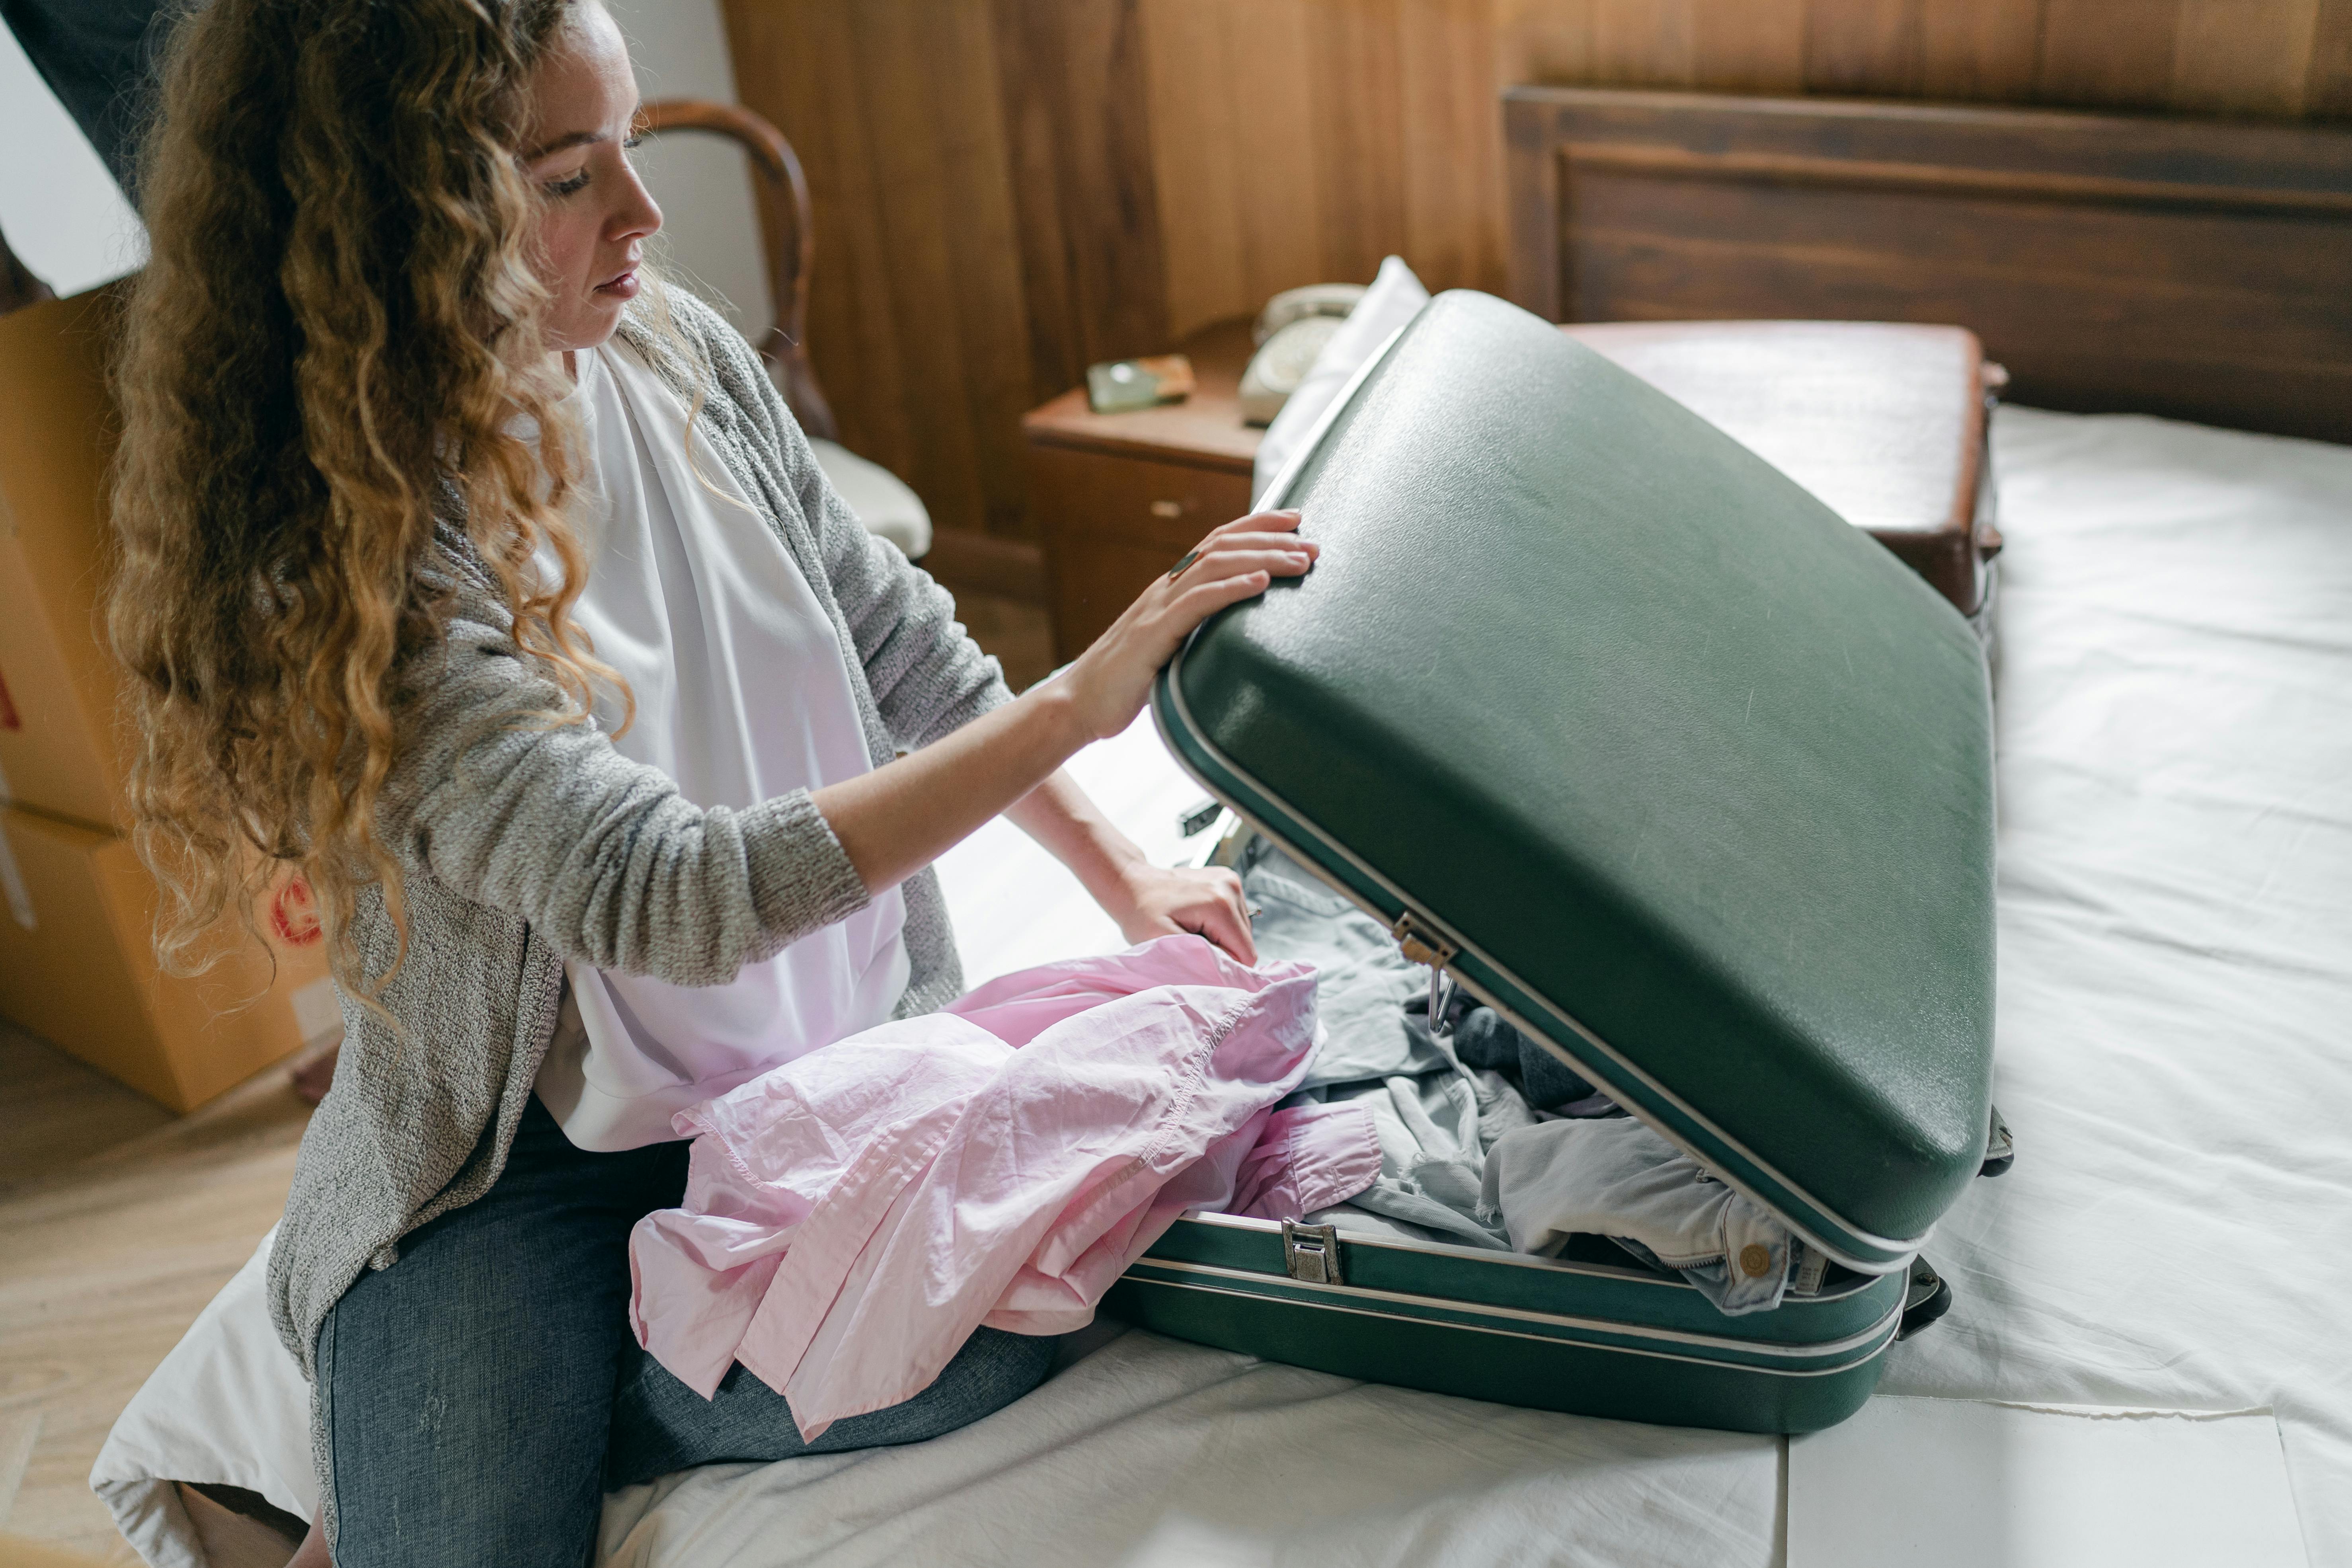 Focus woman packing suitcase on bed · Free Stock Photo